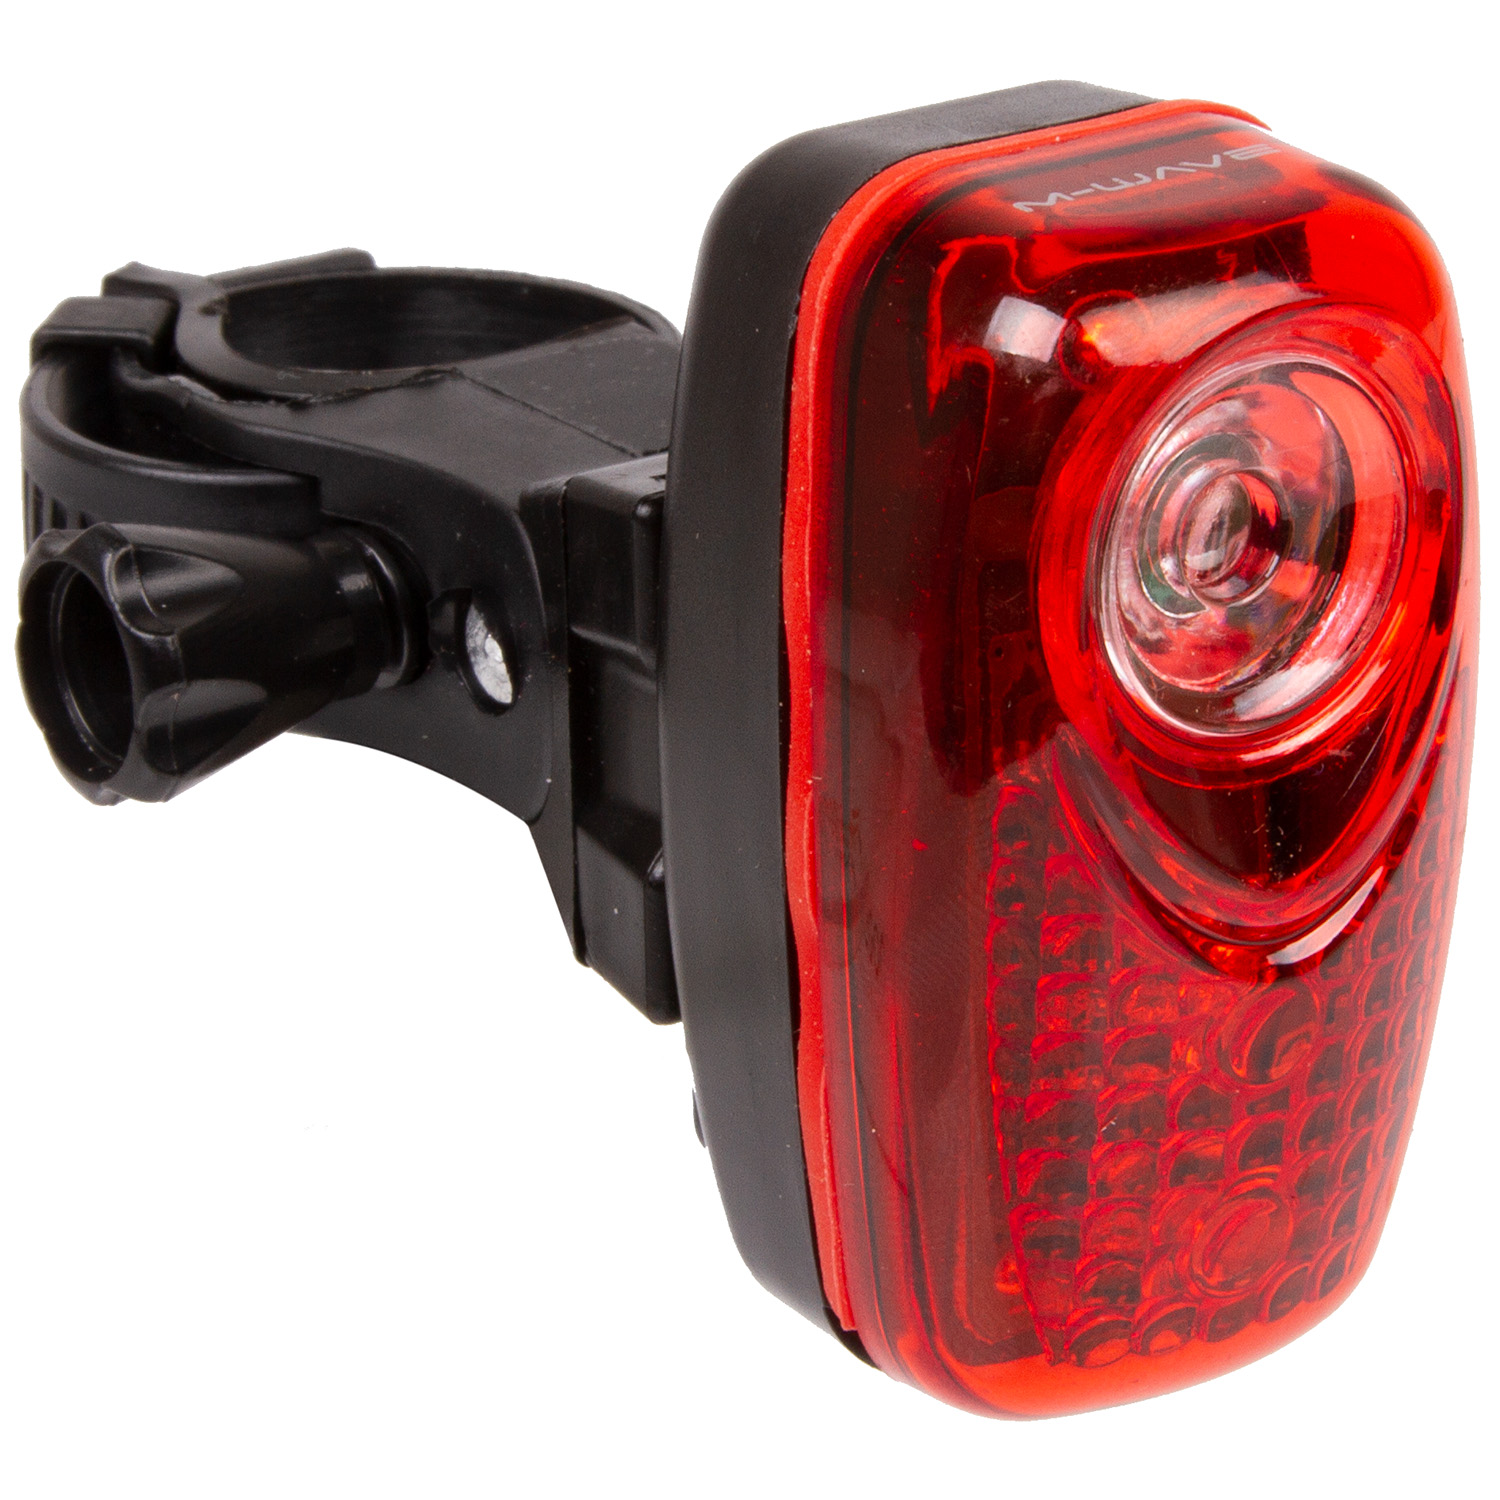 M-WAVE Helios 3.2 S battery flashing light – AVAILABLE IN SELECTED BIKE SHOPS